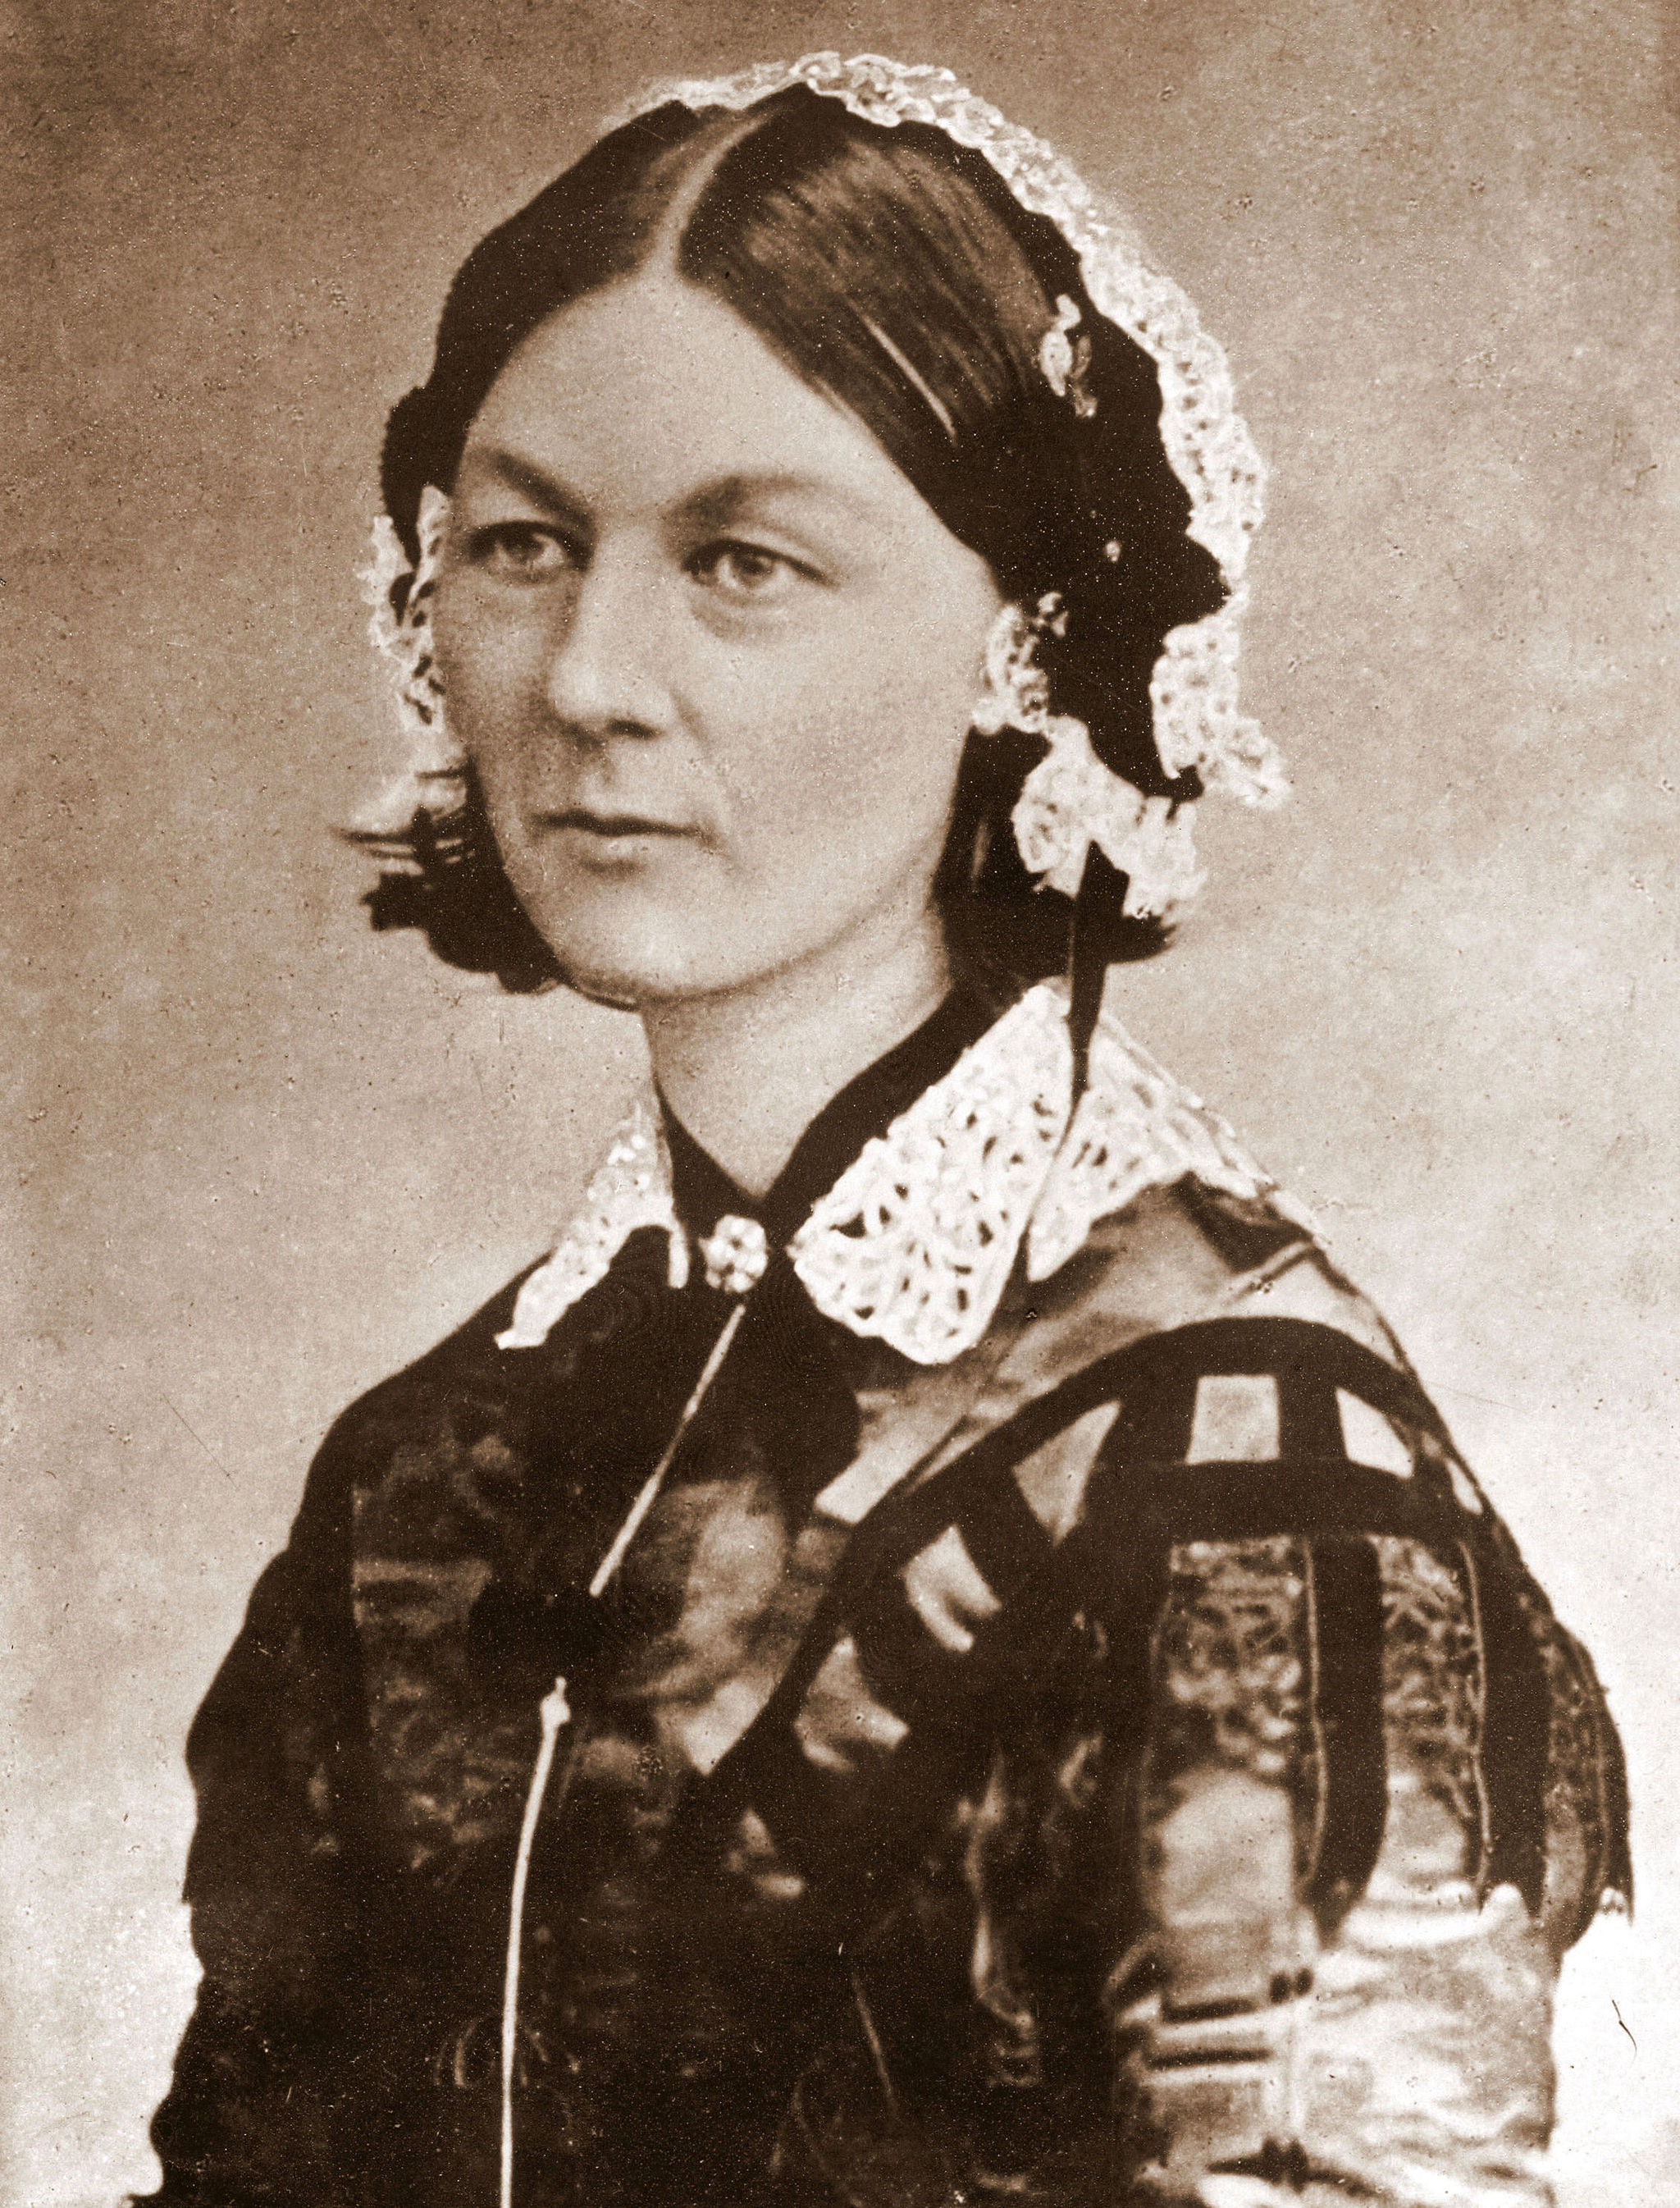 florence nightingale by demi